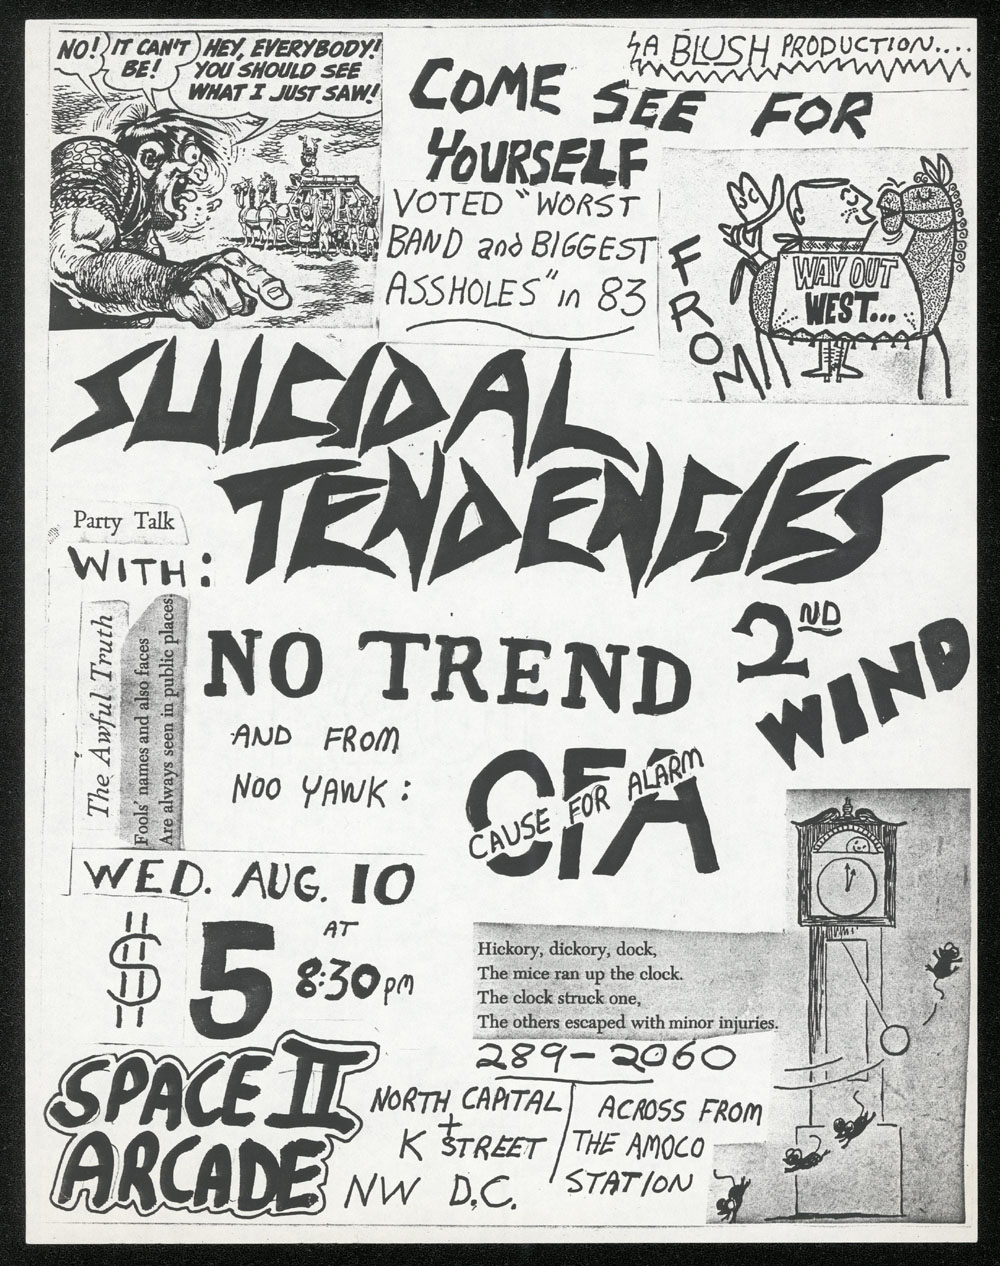 SUICIDAL TENDENCIES w/ No Trend, Second Wind, Cause For Alarm at Space II Arcade